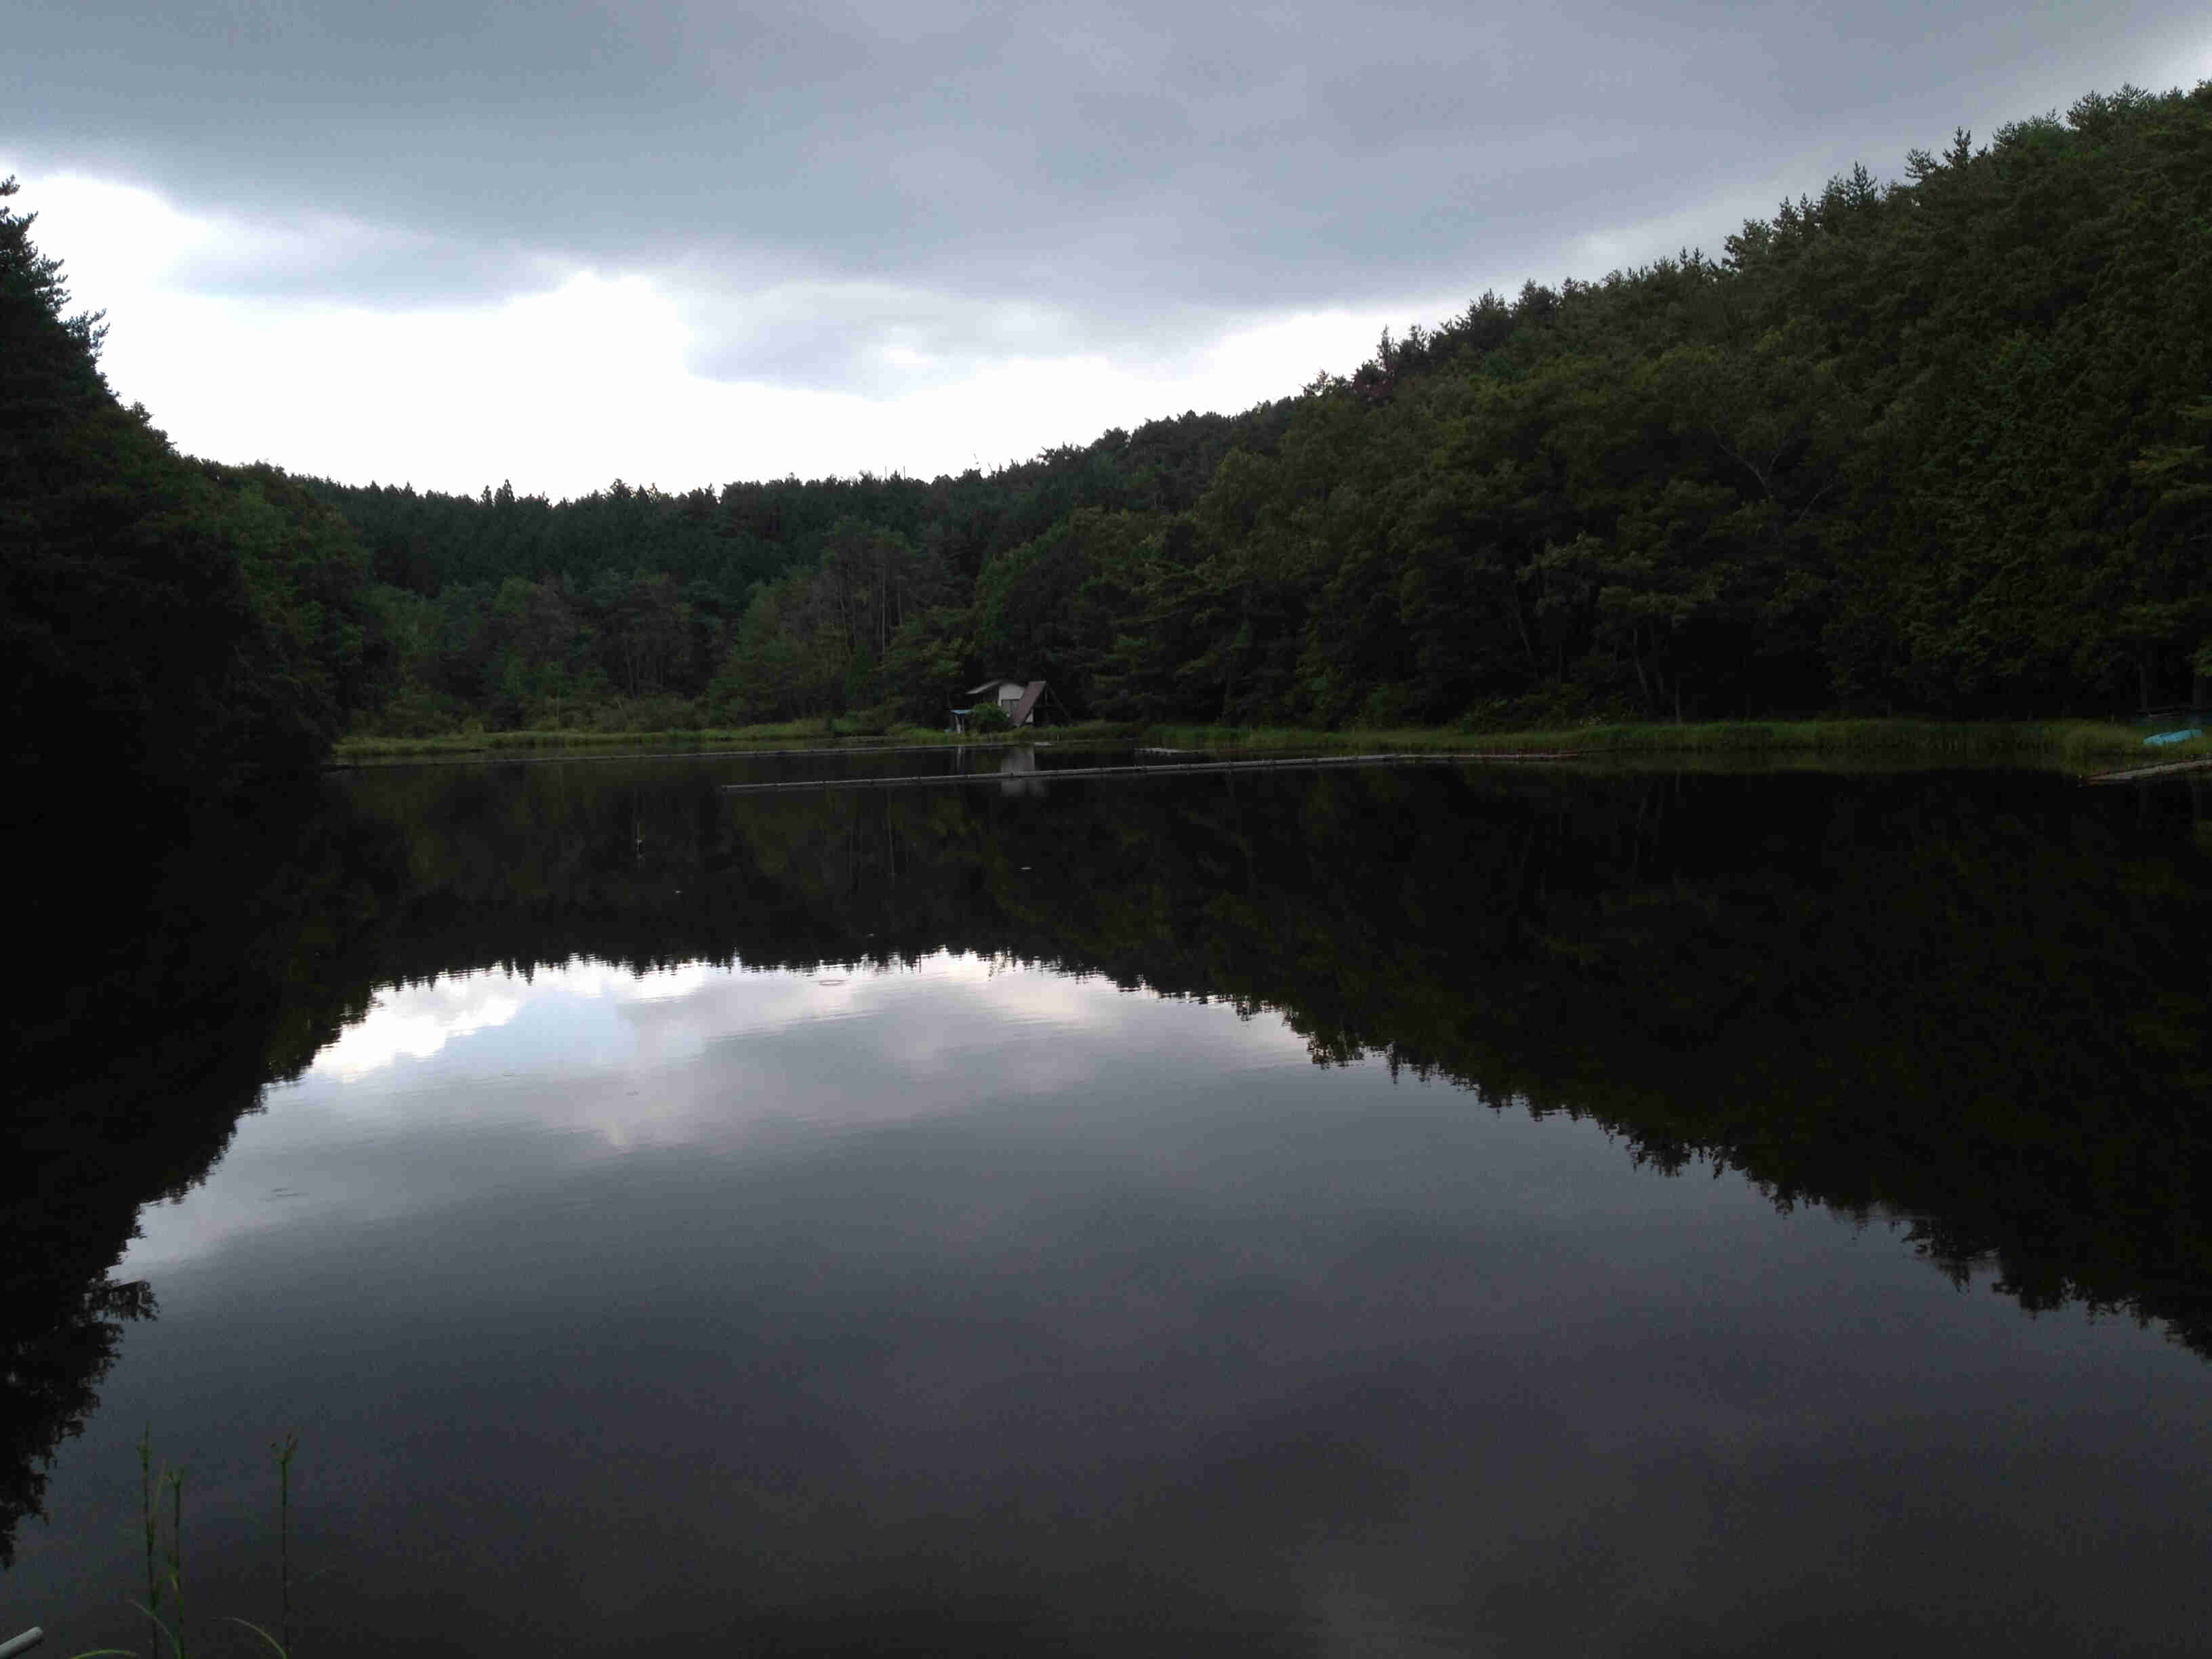 A completely still pond, with a thick forest surrounding it, and reflecting in the water, on a cloudy day